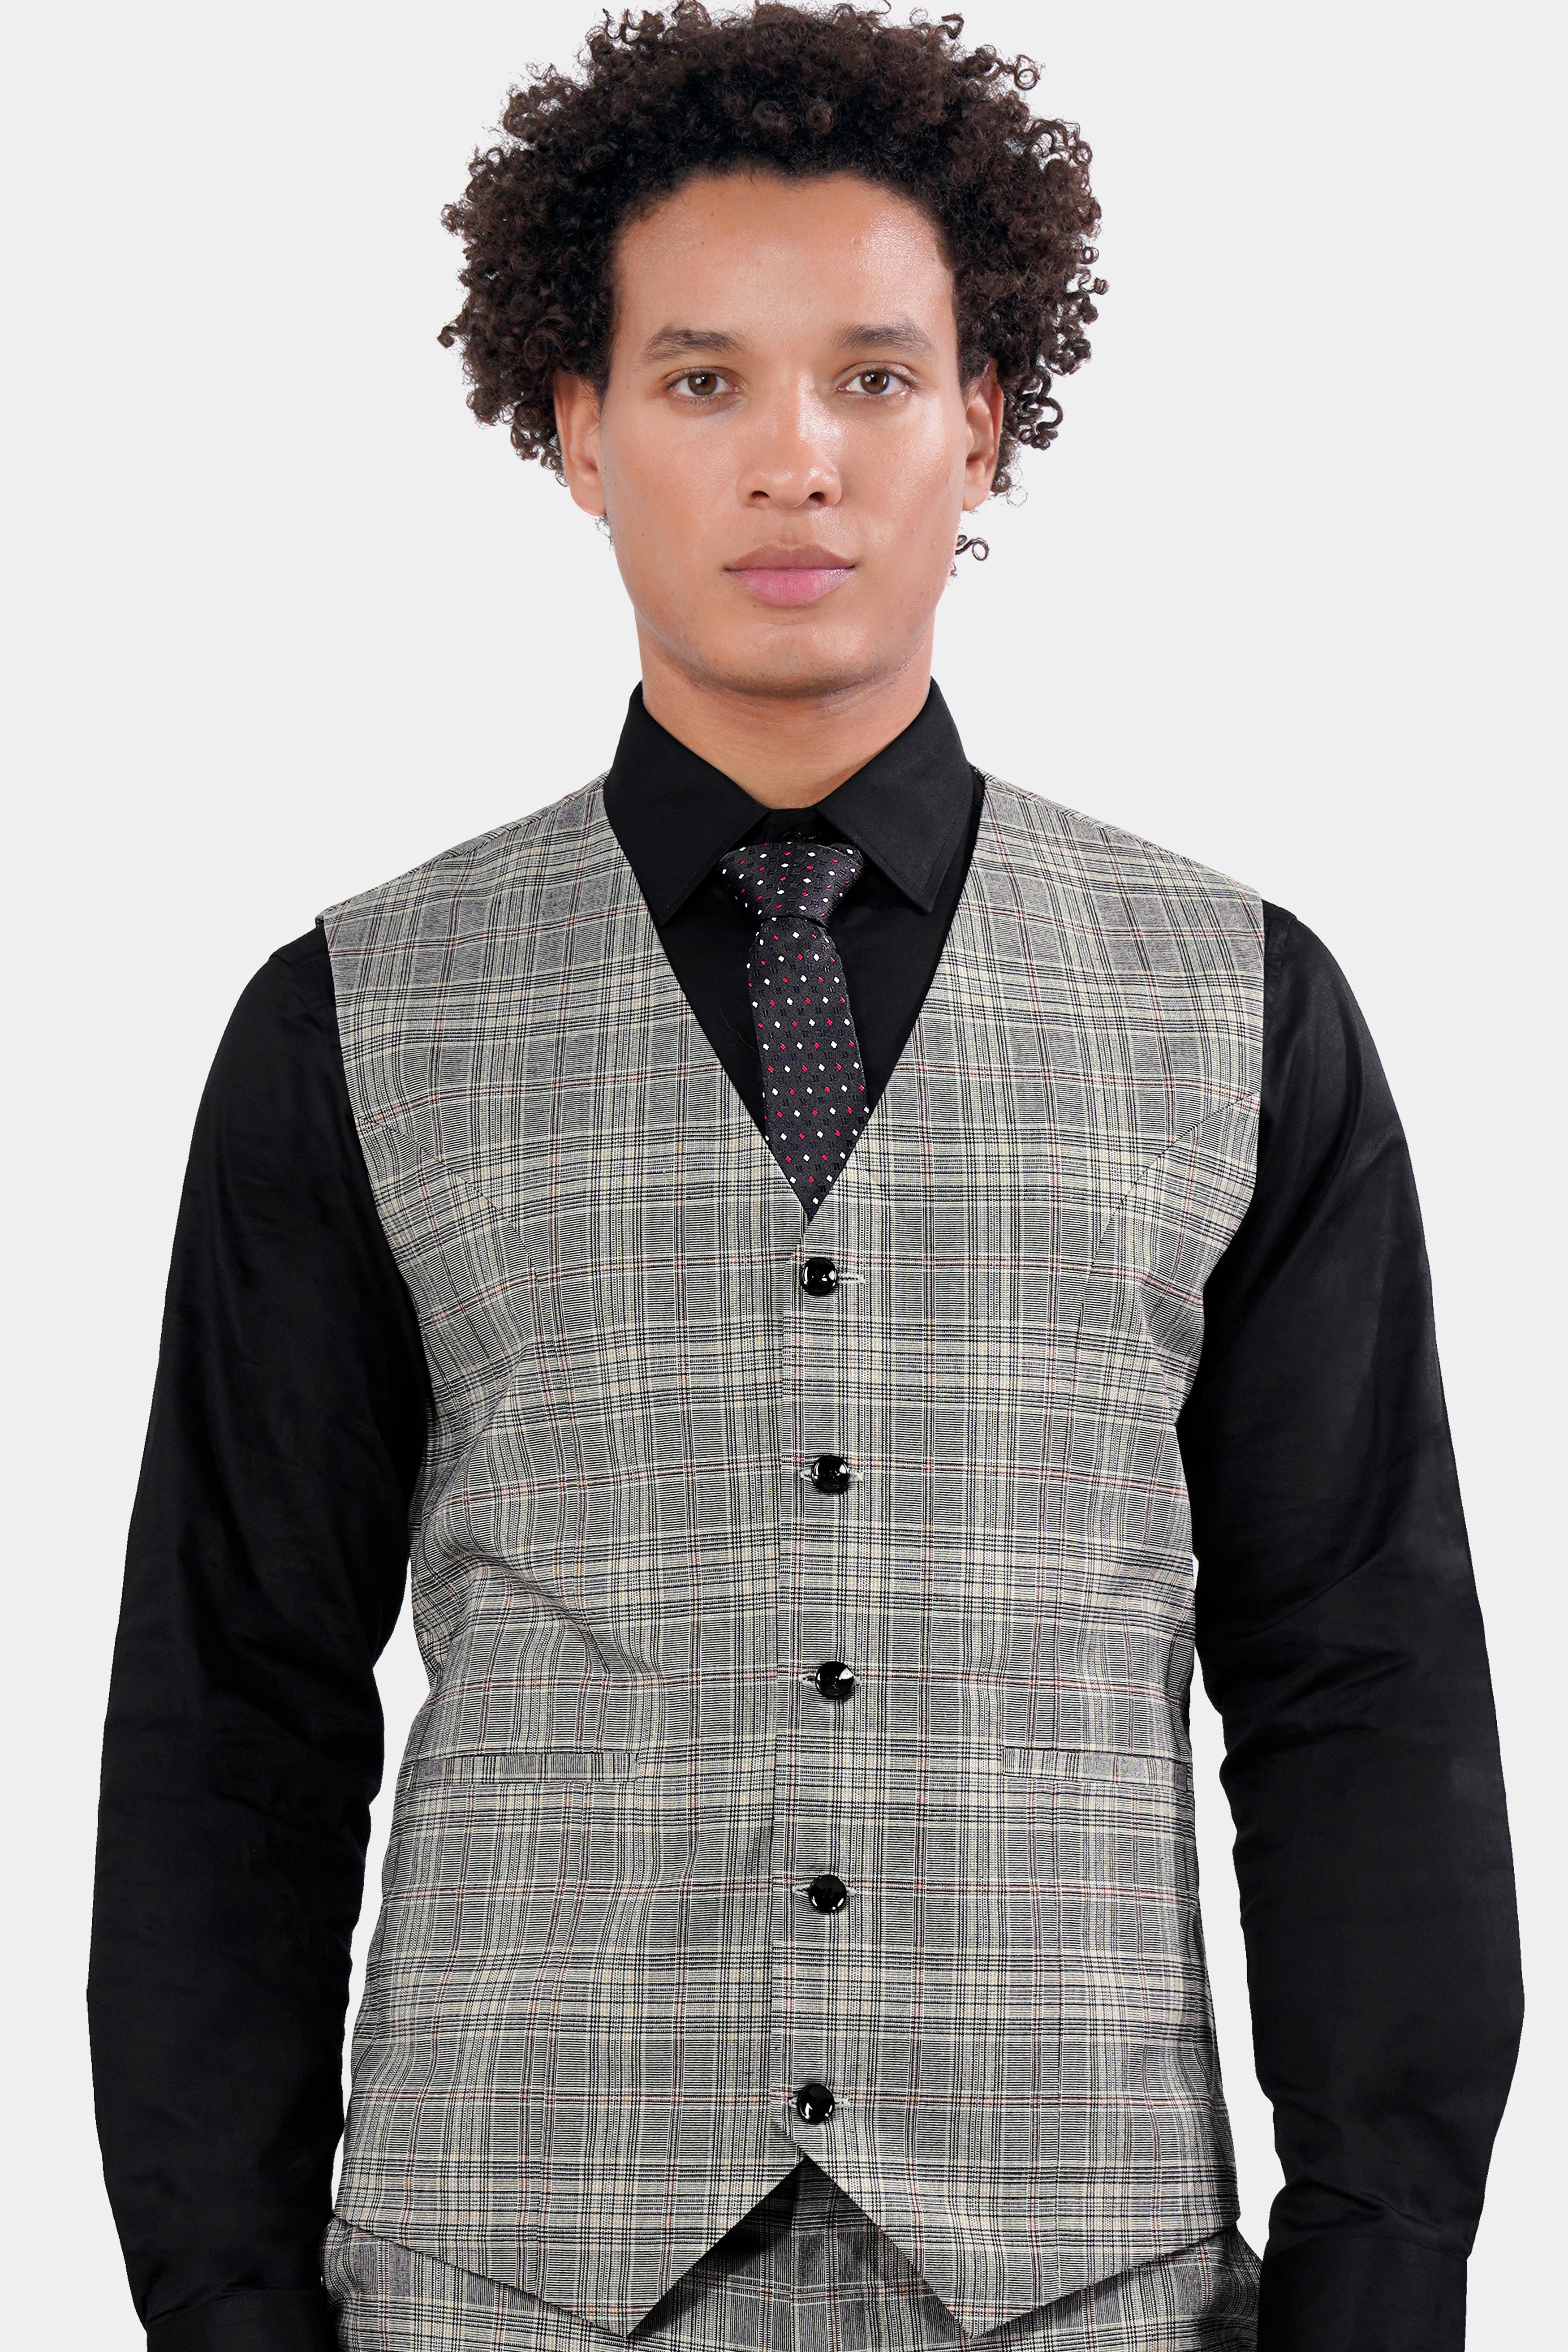 Chalice Gray Plaid and Black Wool Rich Designer Waistcoat V2928-36, V2928-38, V2928-40, V2928-42, V2928-44, V2928-46, V2928-48, V2928-50, V2928-28, V2928-54, V2928-56, V2928-58, V2928-60